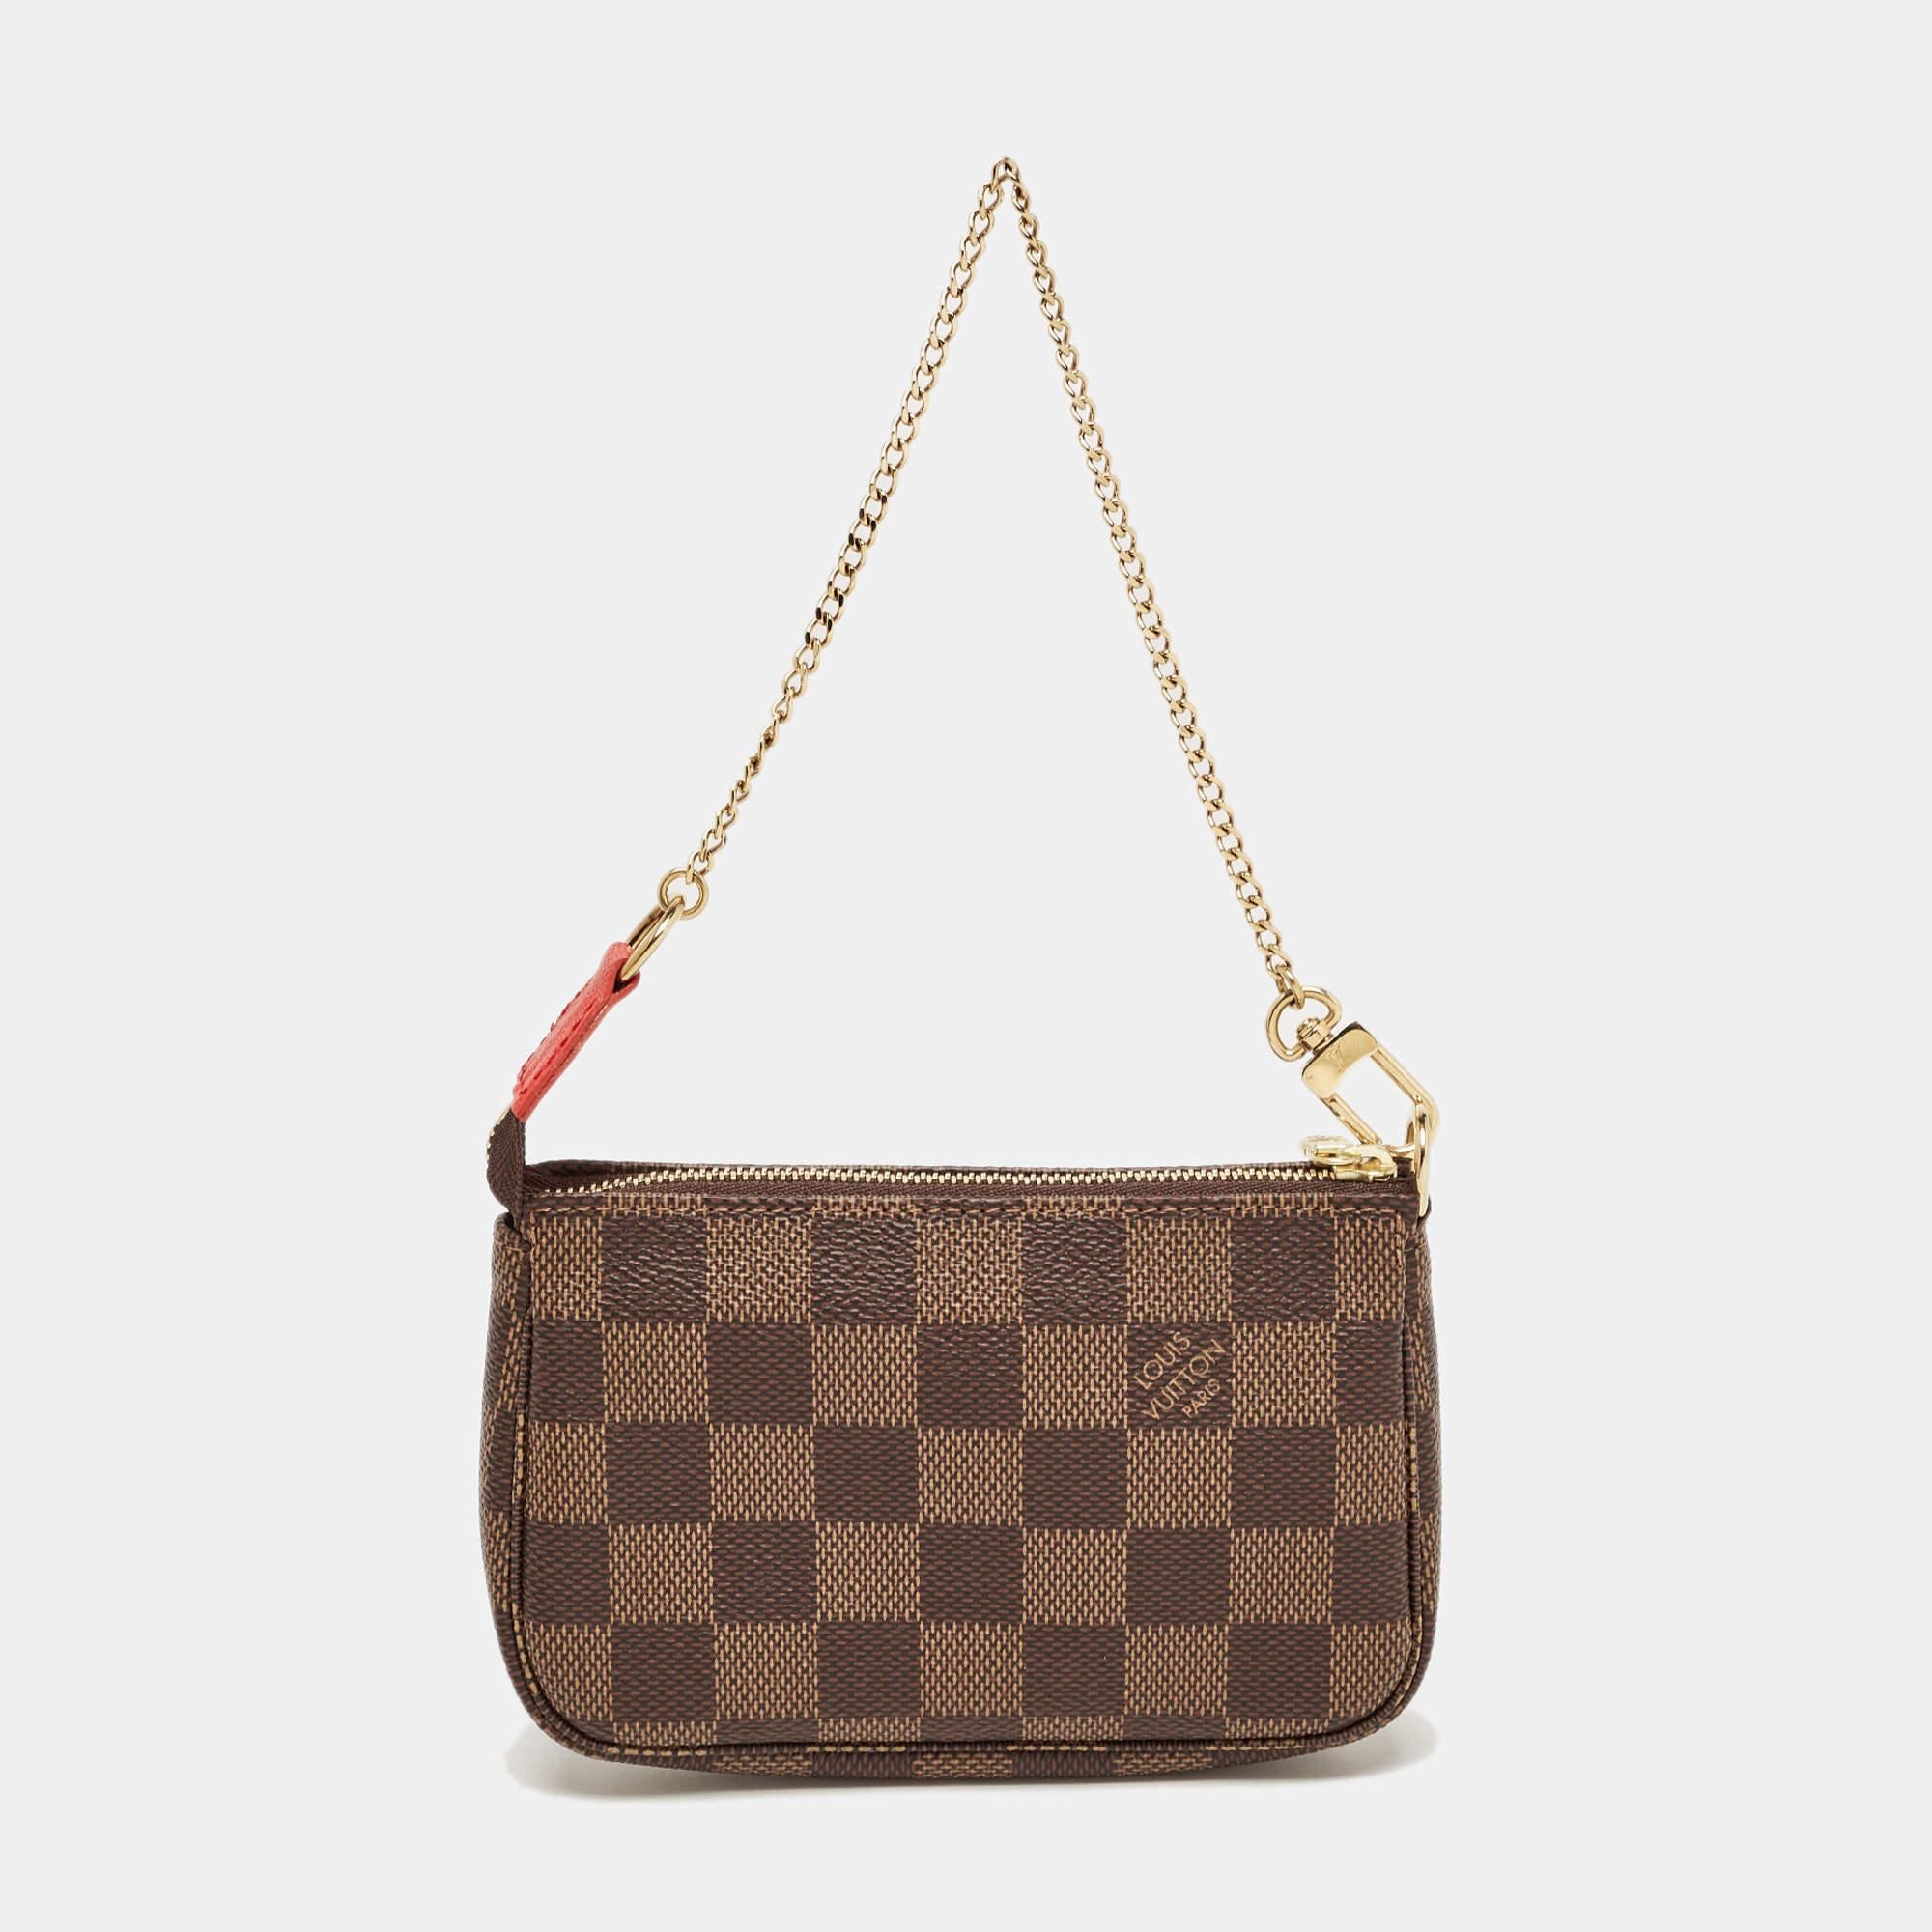 This Louis Vuitton mini Vivienne Pochette Accessoires is a special edition. It is crafted from monogram canvas and the zip on top opens to a canvas-lined interior. Perfect in size, this bag is held by a gold-tone chain.

Includes: Original Dustbag

